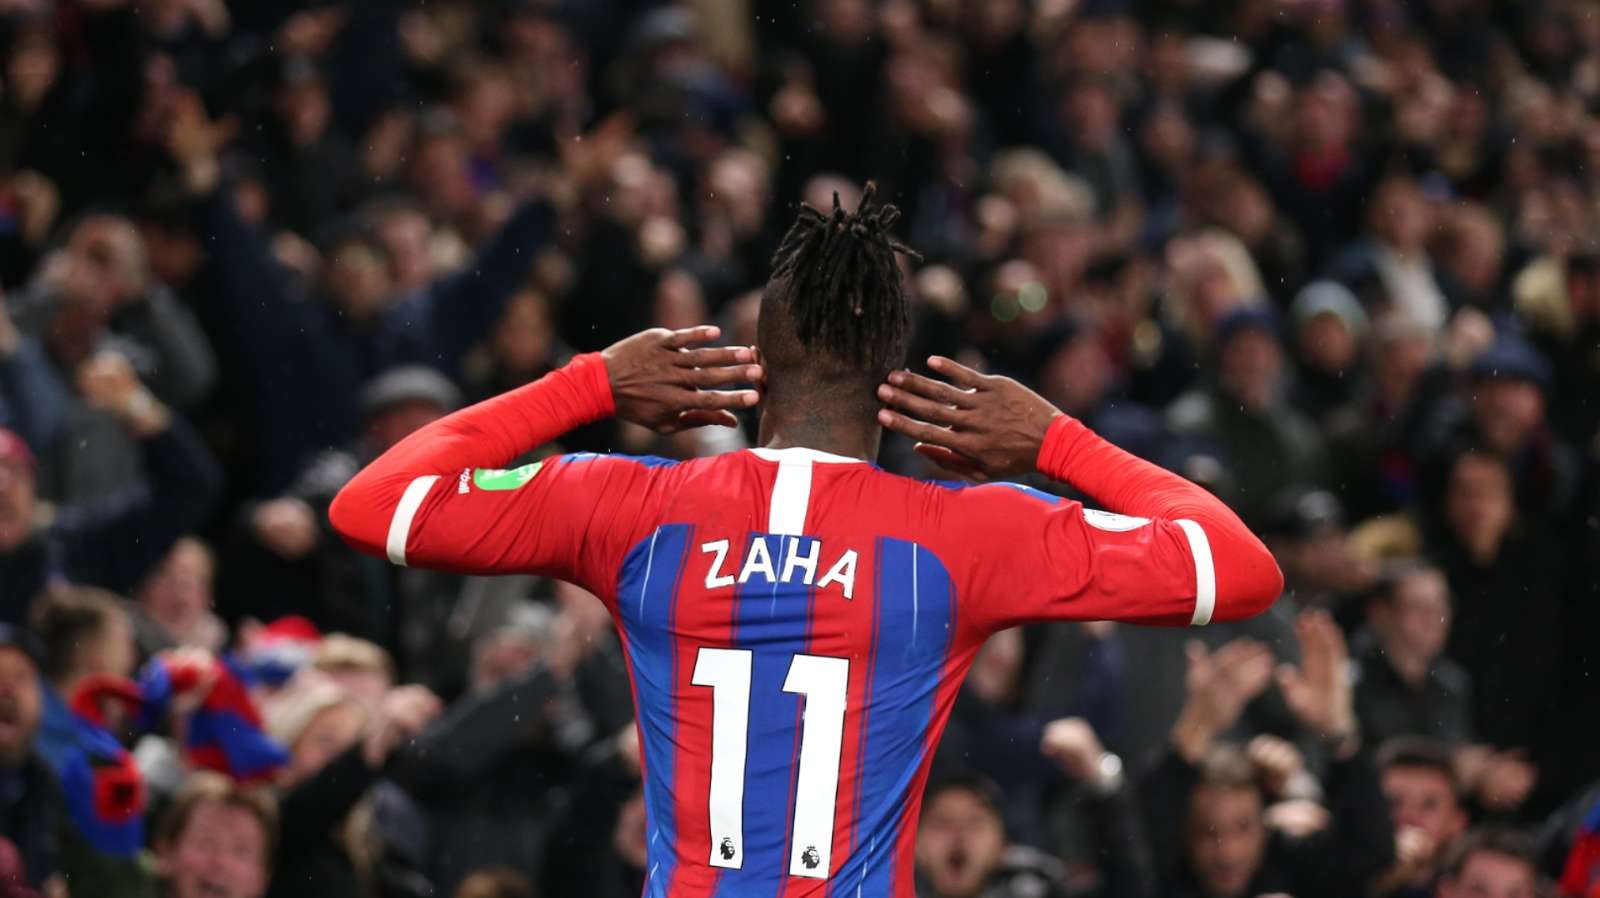 'Zaha is worth £80m all day long' - Chelsea & Arsenal-linked winger has 'world at his feet', says Palace favourite - Bóng Đá